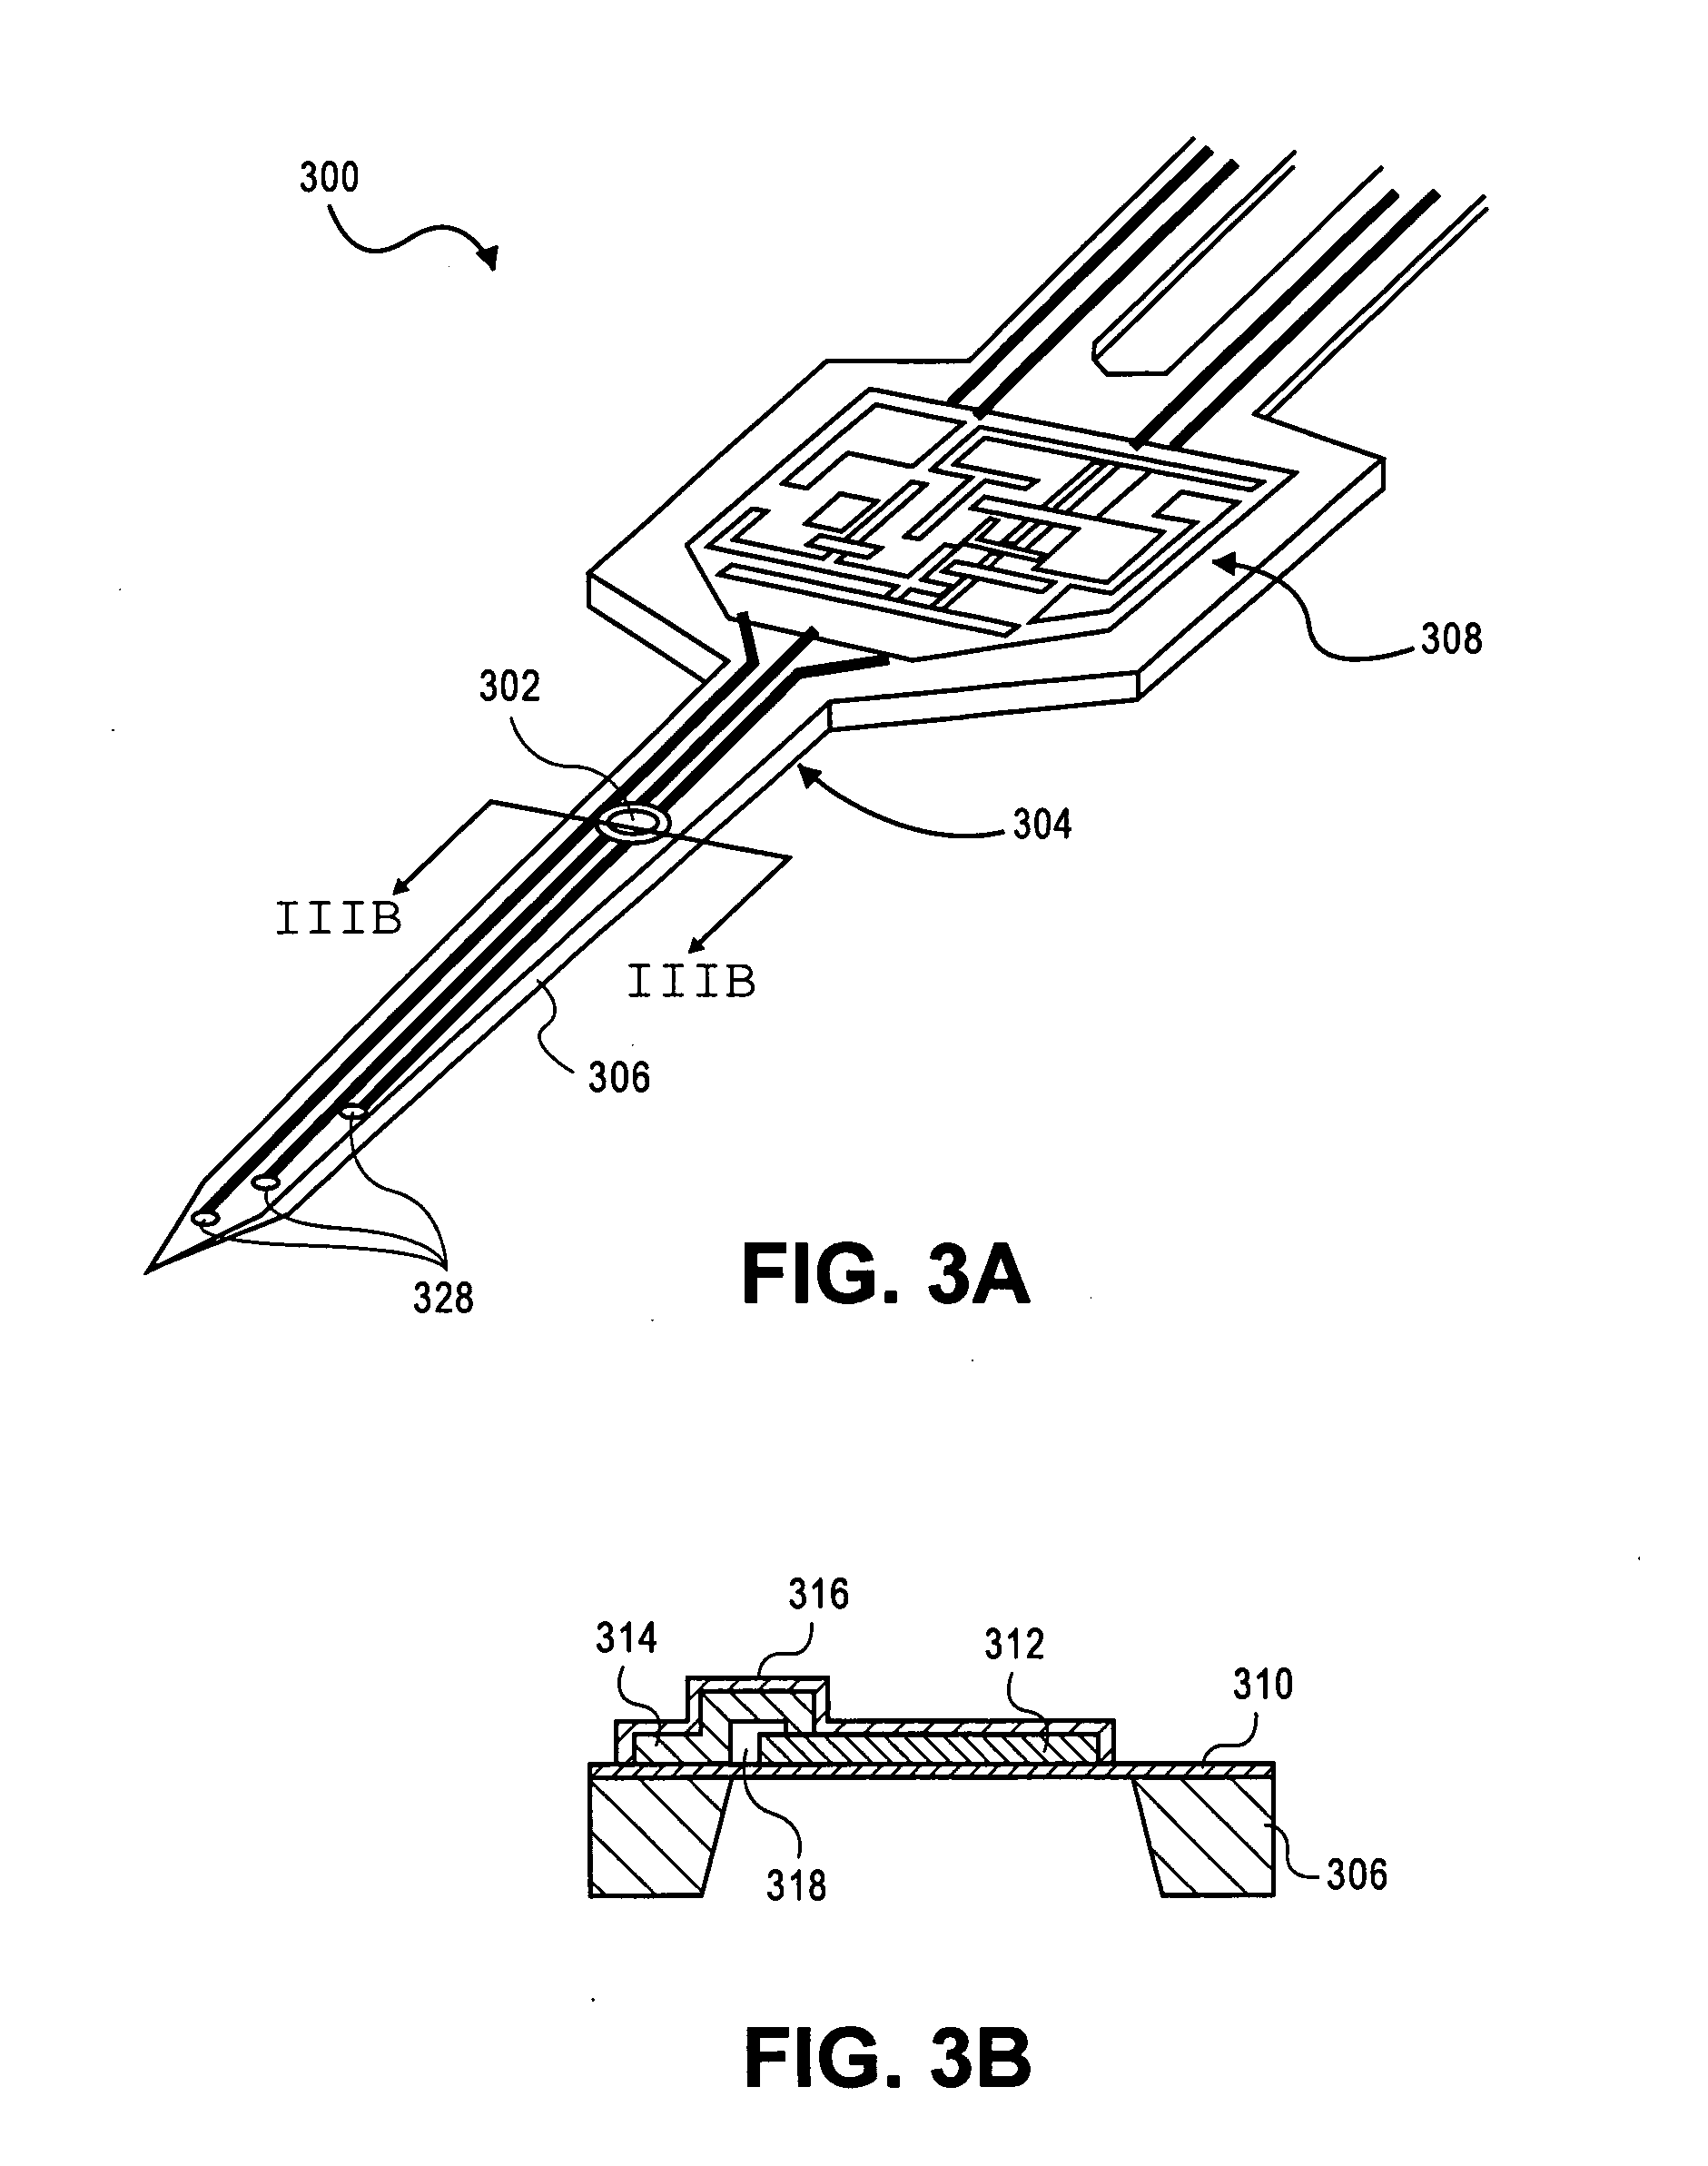 Micro-machined medical devices, methods of fabricating microdevices, and methods of medical diagnosis, imaging, stimulation, and treatment